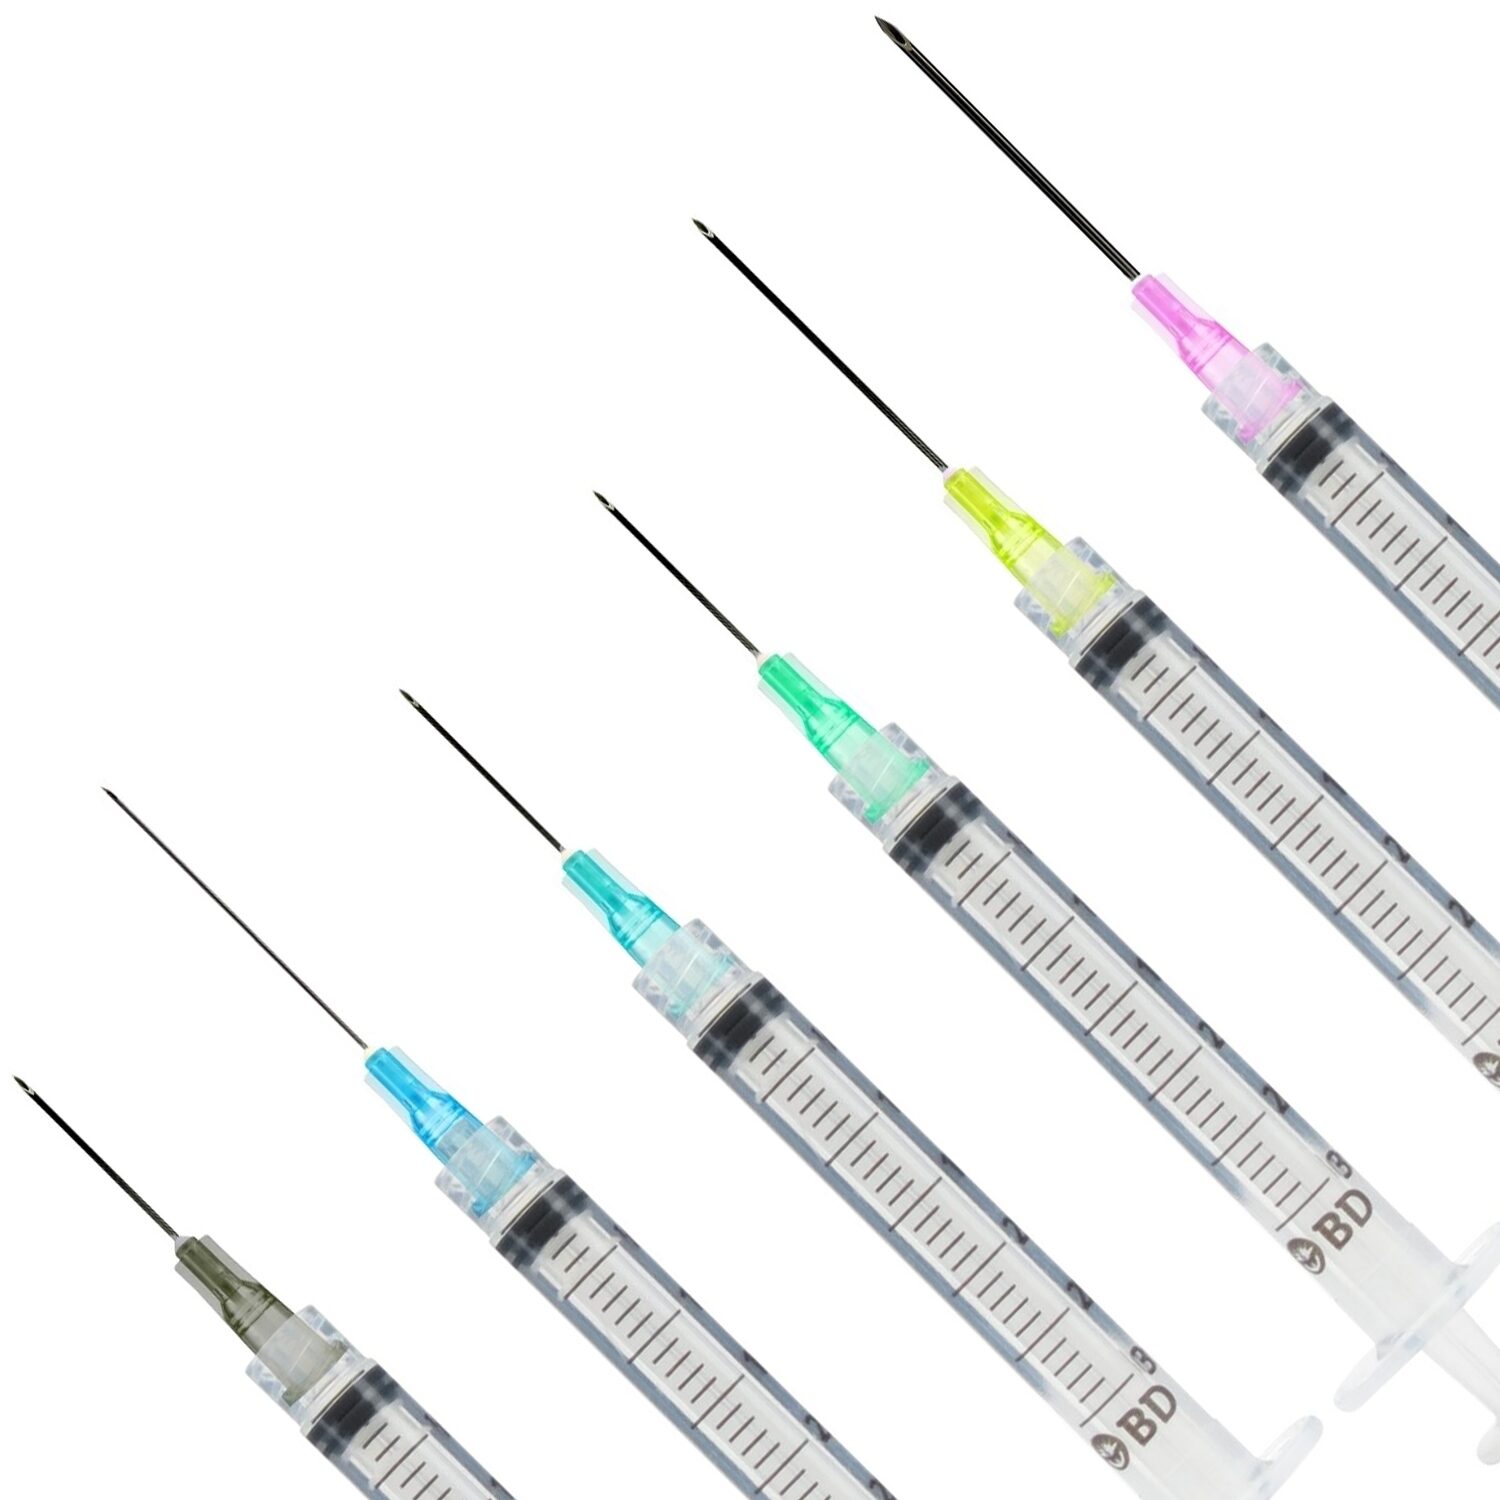 BD PrecisionGlide Luer-Lok Syringe with attached needle 3 mL, 23 G x 1 in  (Pack of 100)